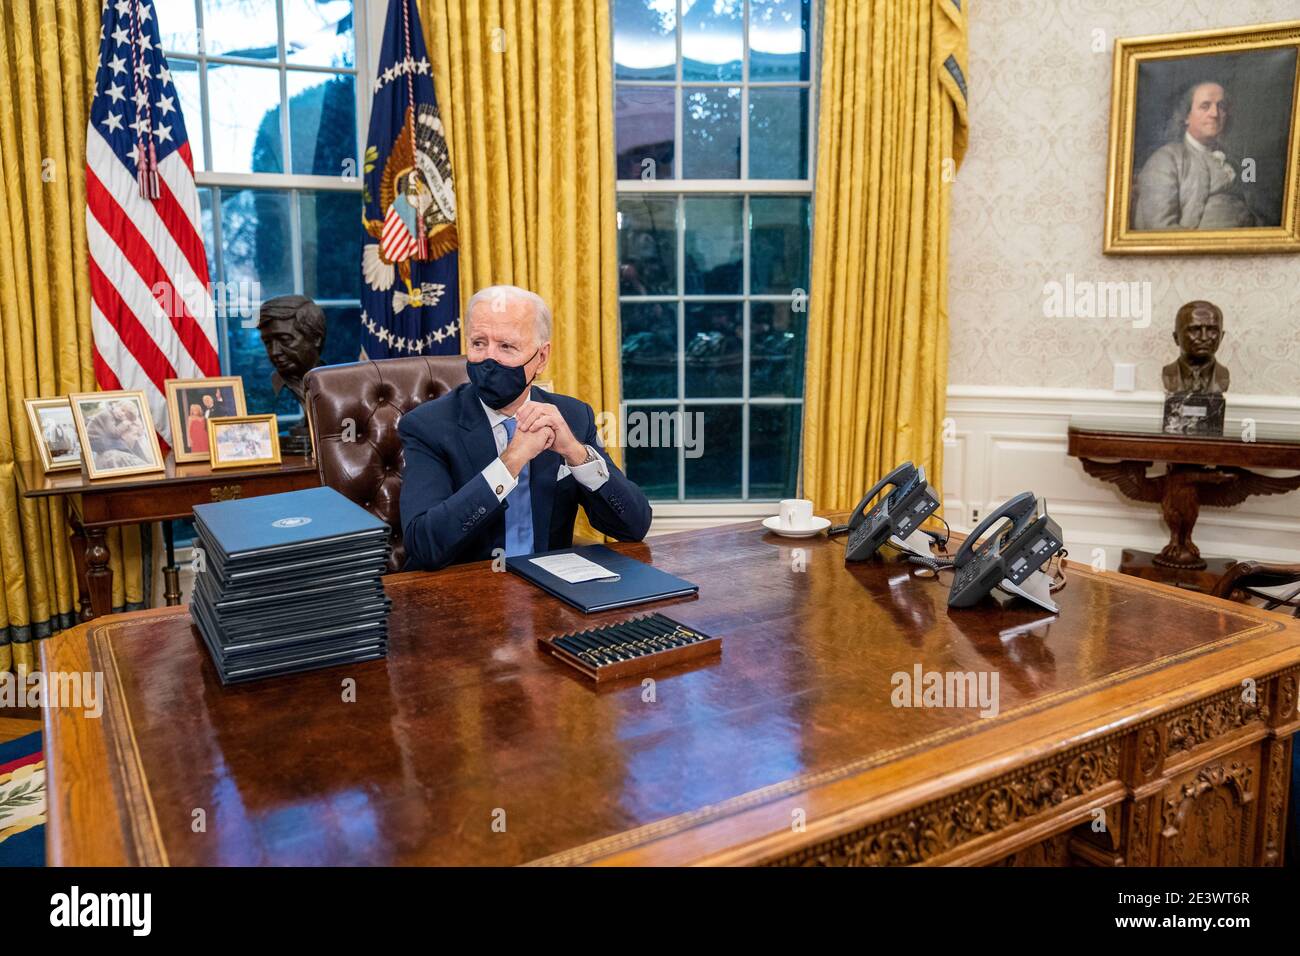 United States President Joe Biden signs executive order on Covid-19 during his first minutes in the Oval Office, Wednesday, Jan. 20, 2021. President Biden as the 46th president of the United States. Credit: Doug Mills/Pool via CNP | usage worldwide Stock Photo